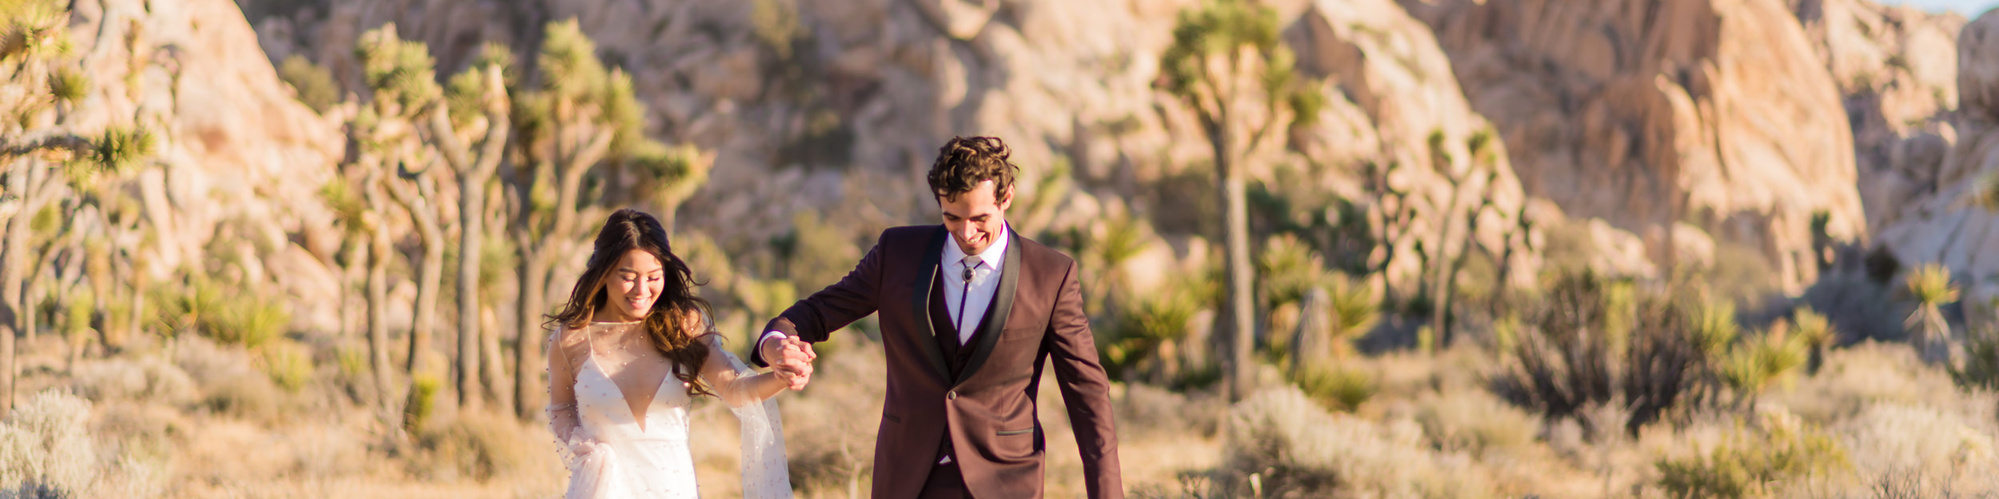 An eloping bride and groom run excitedly through the desert in Joshua Tree National Park